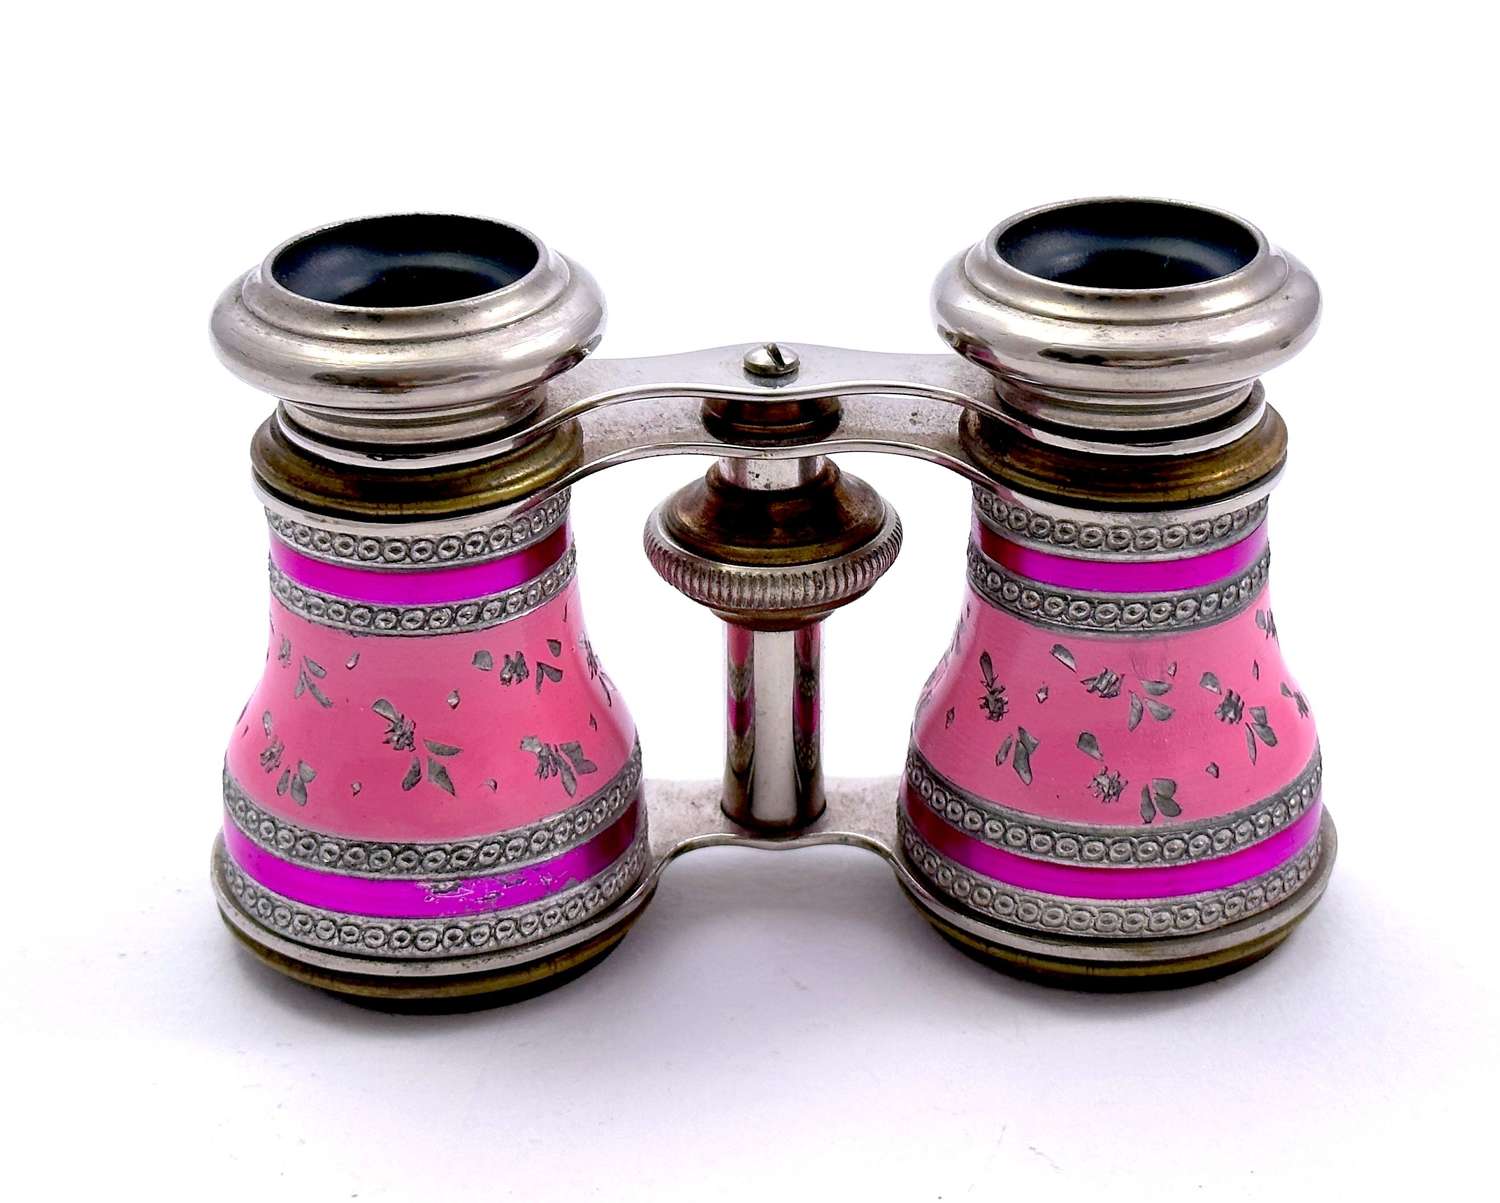 An Exceptional Pair of Antique French Pink Enamel Opera Glasses.